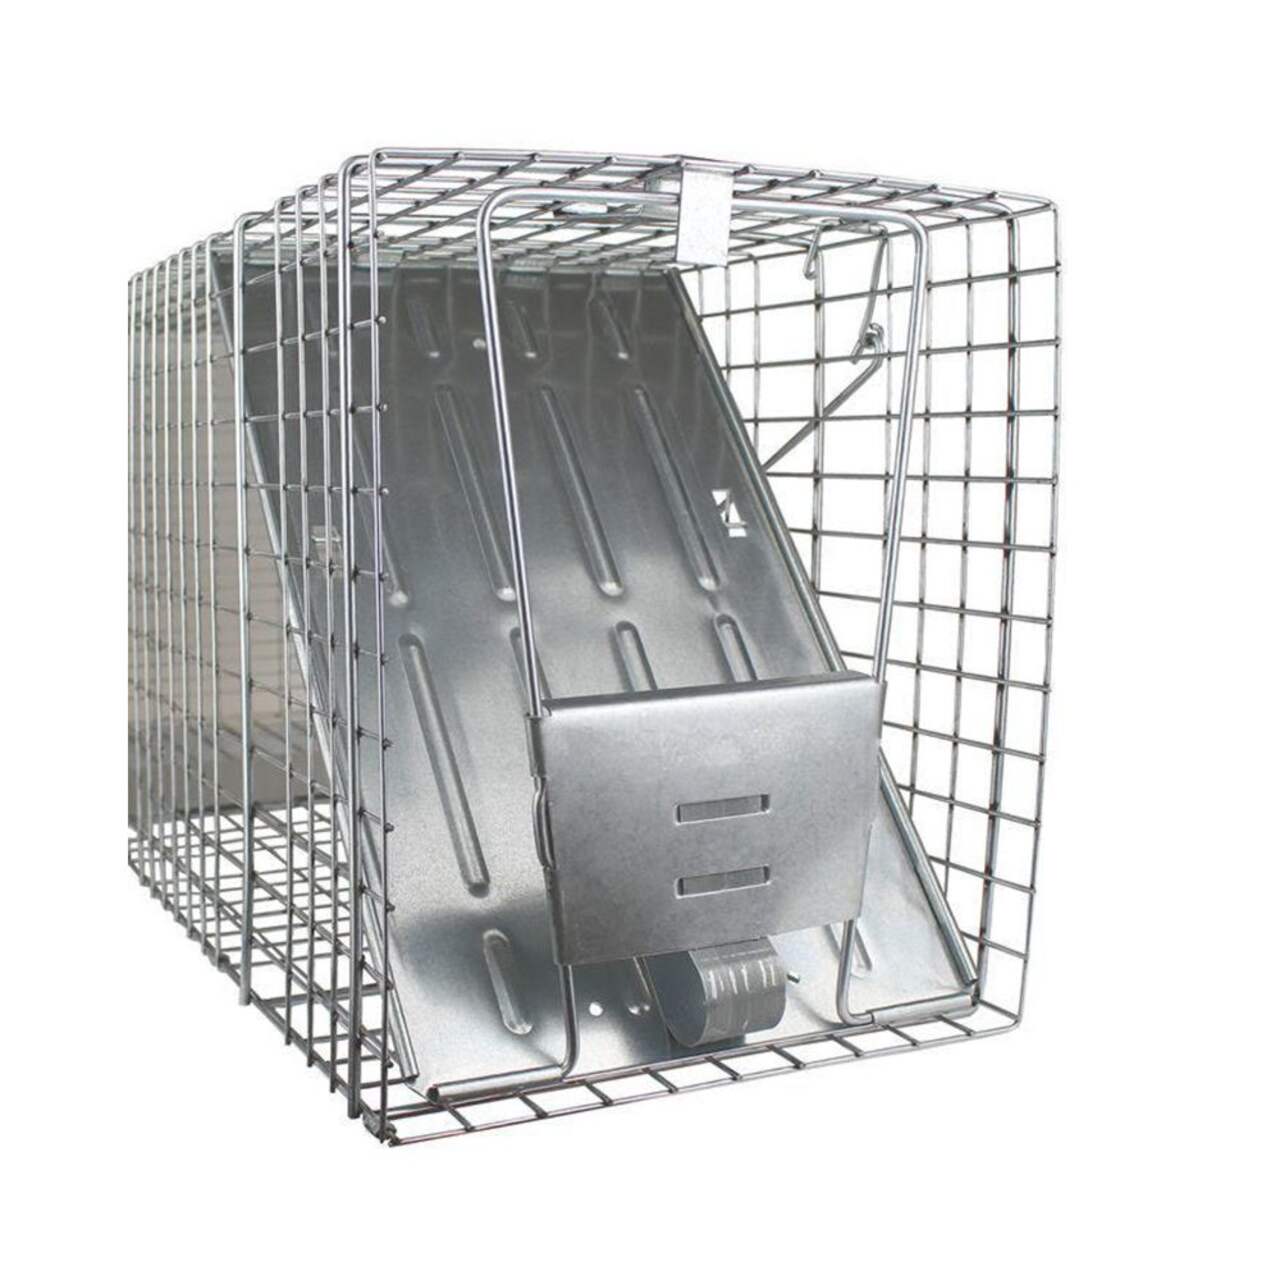 https://media-www.canadiantire.ca/product/seasonal-gardening/gardening/weed-insect-and-pest-control/1591062/havahart-raccoon-live-trap-01524bac-07ee-49cb-82ce-0127c21b09c3-jpgrendition.jpg?imdensity=1&imwidth=640&impolicy=mZoom